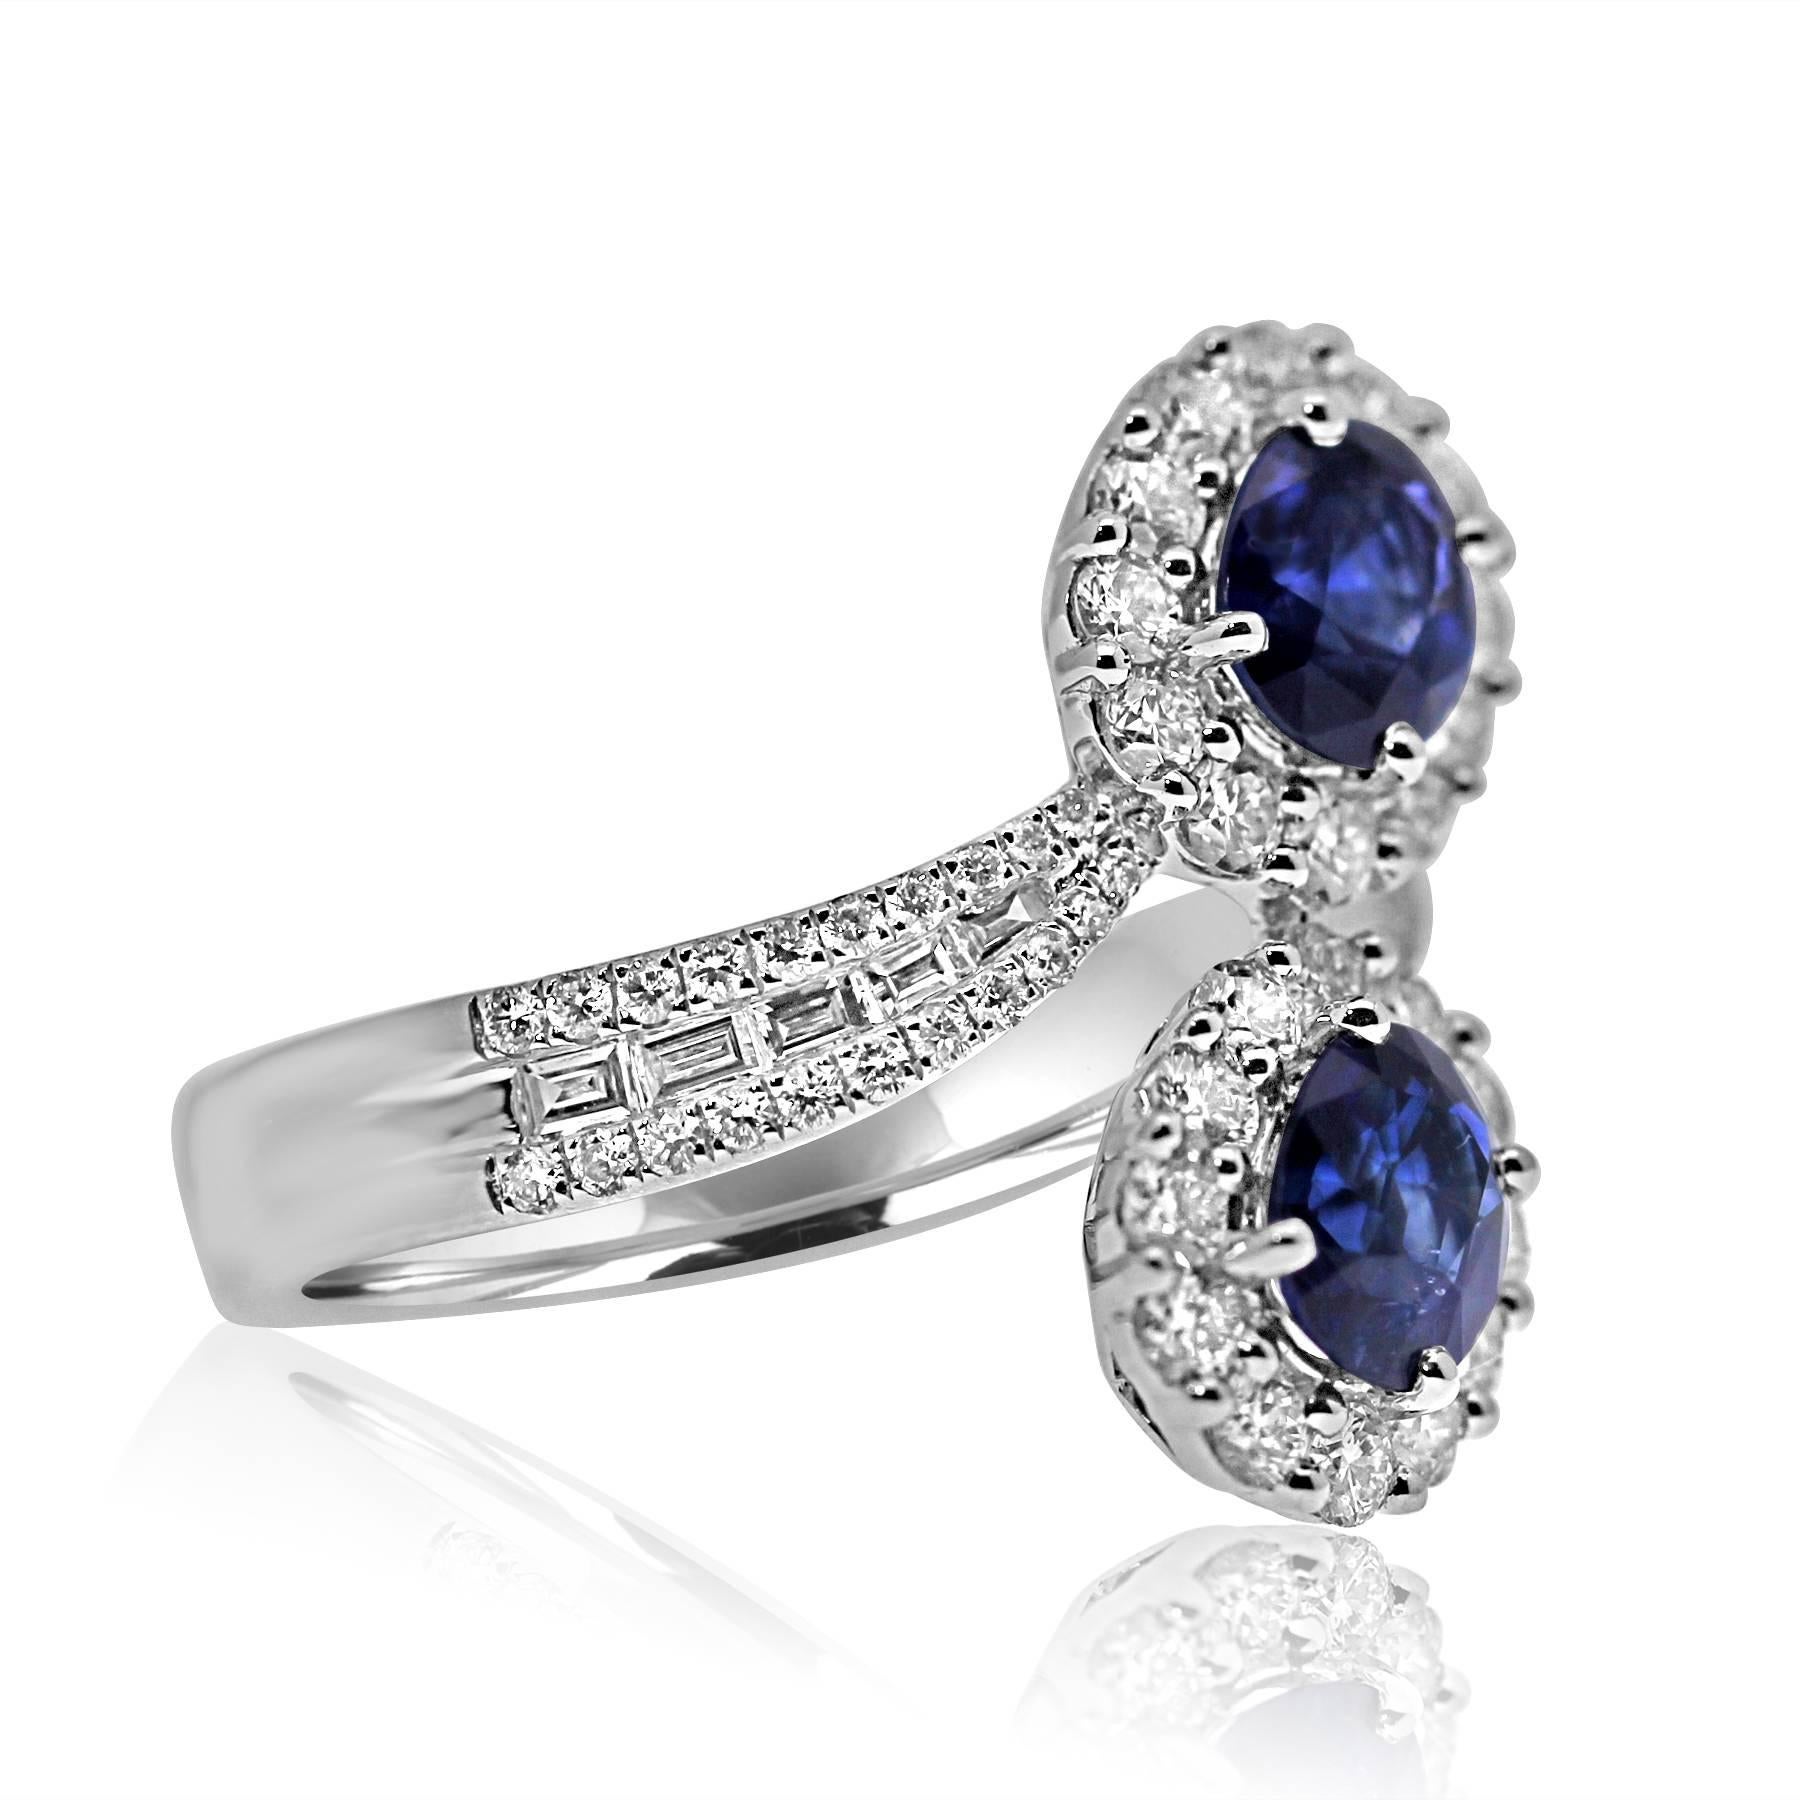 platinum  ring featuring two blue sapphires gemstones of 1.78ct total in a design called toi-et-moi which means me and you together forever.
surrounded by degraded brilliant and baguette cut diamonds of 1.15ct total to give an extra sparkly finish